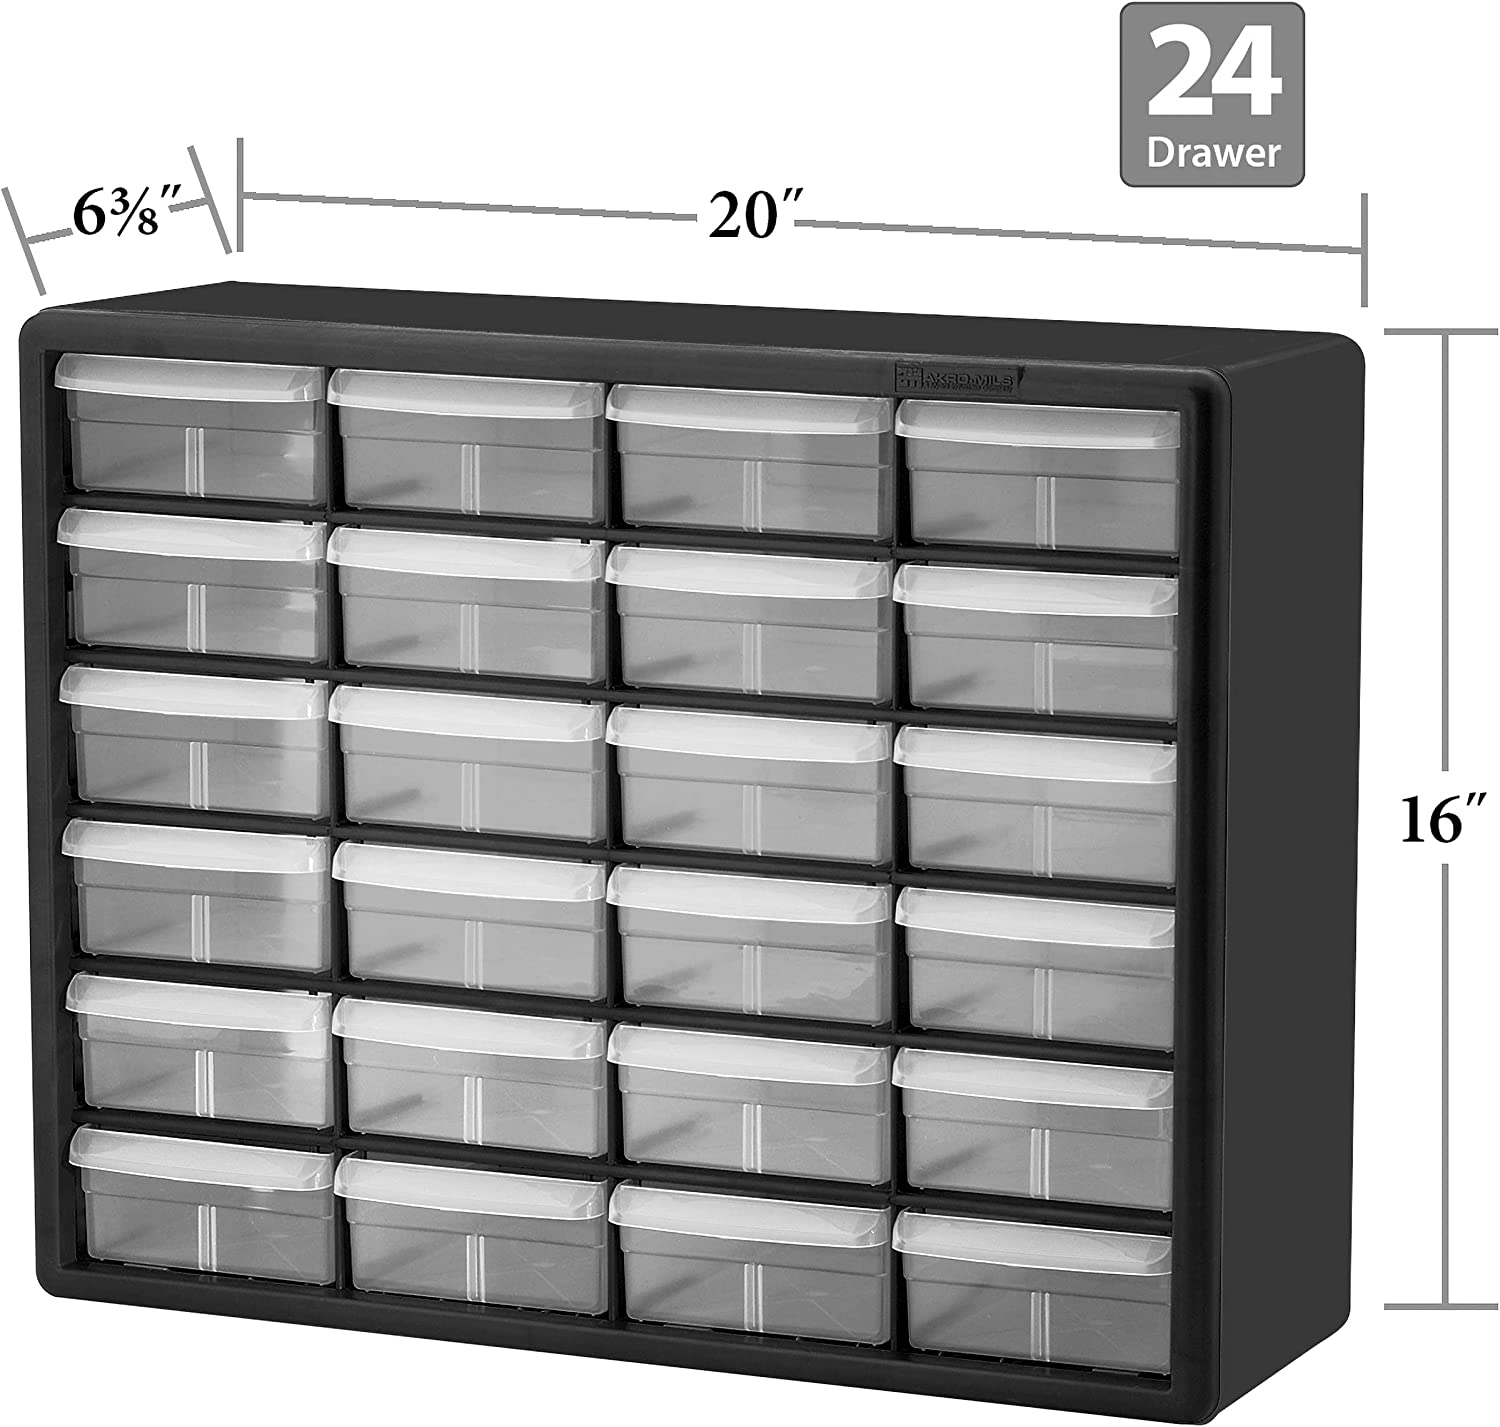 Akro-Mils 24 Drawer Plastic Storage Organizer with Drawers for Hardware,  Small Parts, Craft Supplies